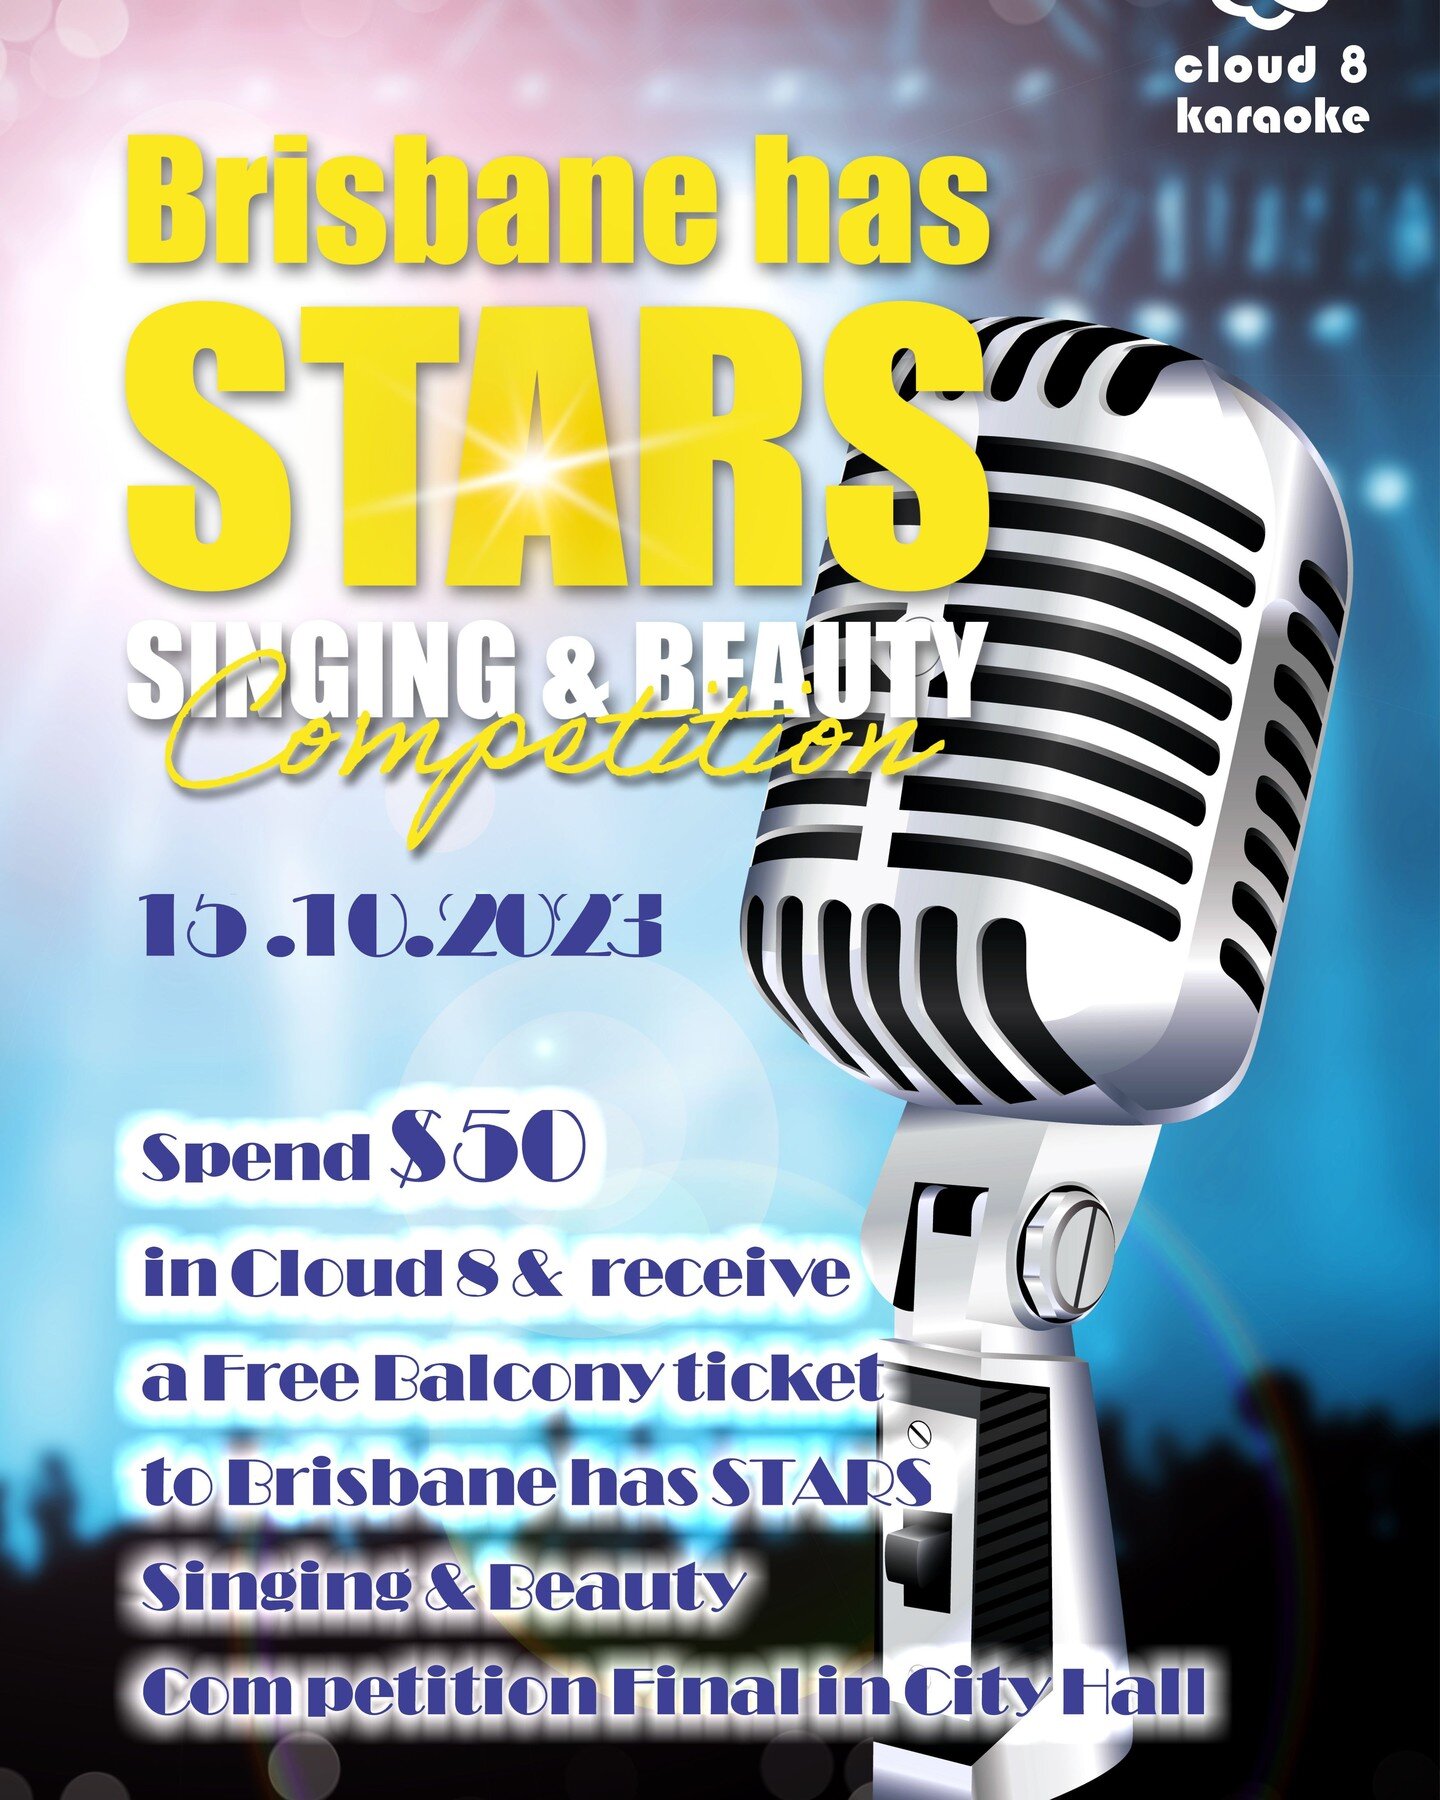 💛The Brisbane Has Stars Beauty Competition and Singing Competition Grand Finals are scheduled for 15th October.💛
🎉Dinner tickets are already sold out, 🥰but if you want to witness the spectacular evening event at City Hall, don't miss the chance t